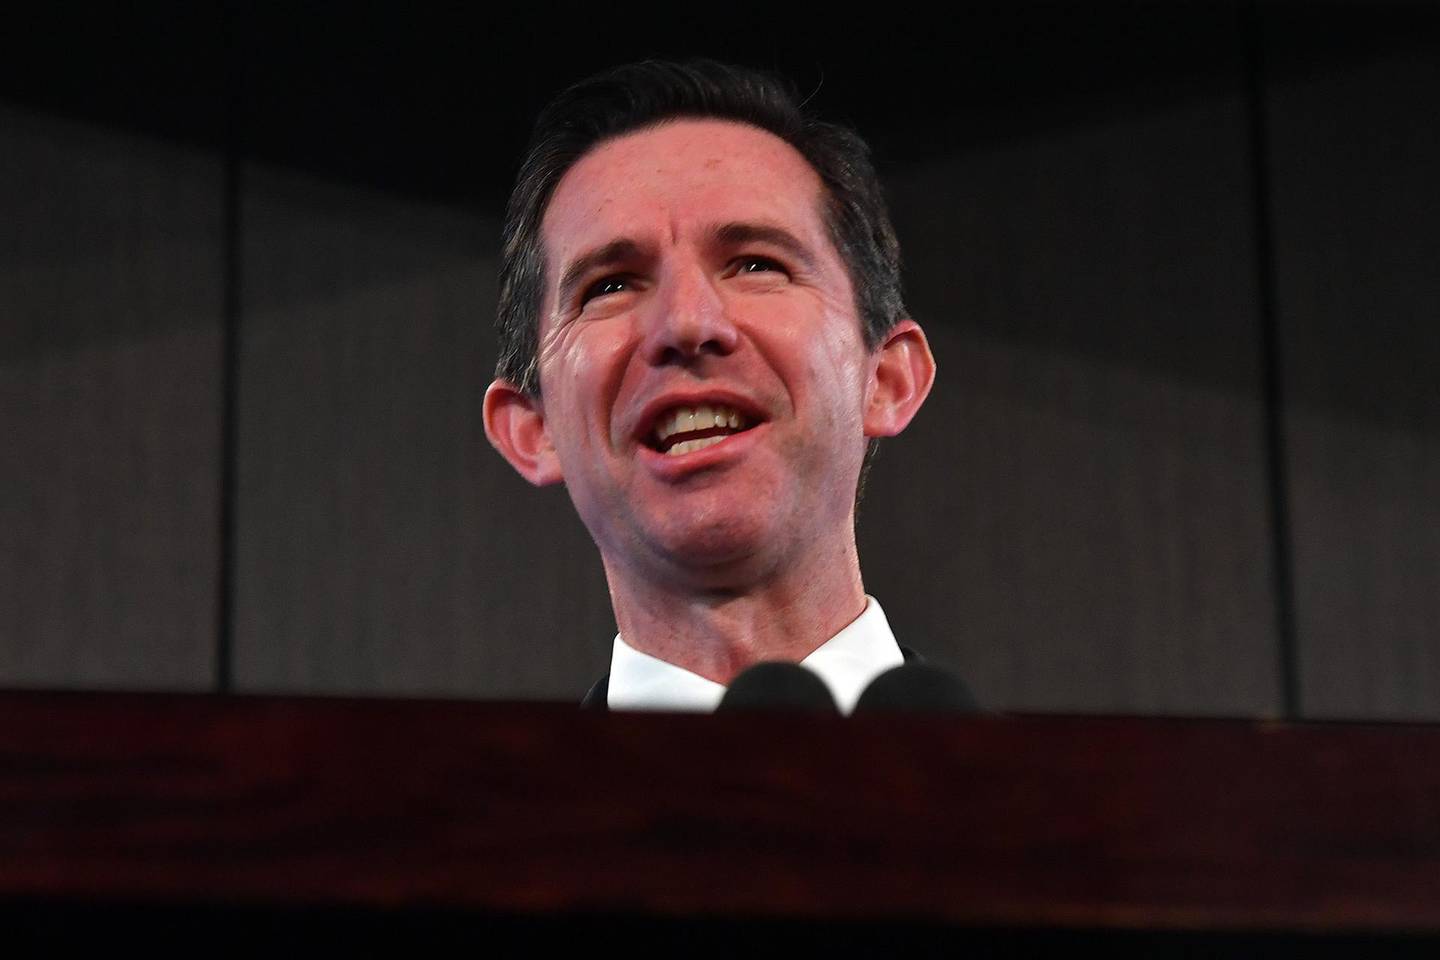 CANBERRA, AUSTRALIA - JUNE 17: Minister for Trade, Tourism and Investment Simon Birmingham delivers his address to the National Press Club on June 17, 2020 in Canberra, Australia. (Photo by Sam Mooy/Getty Images)